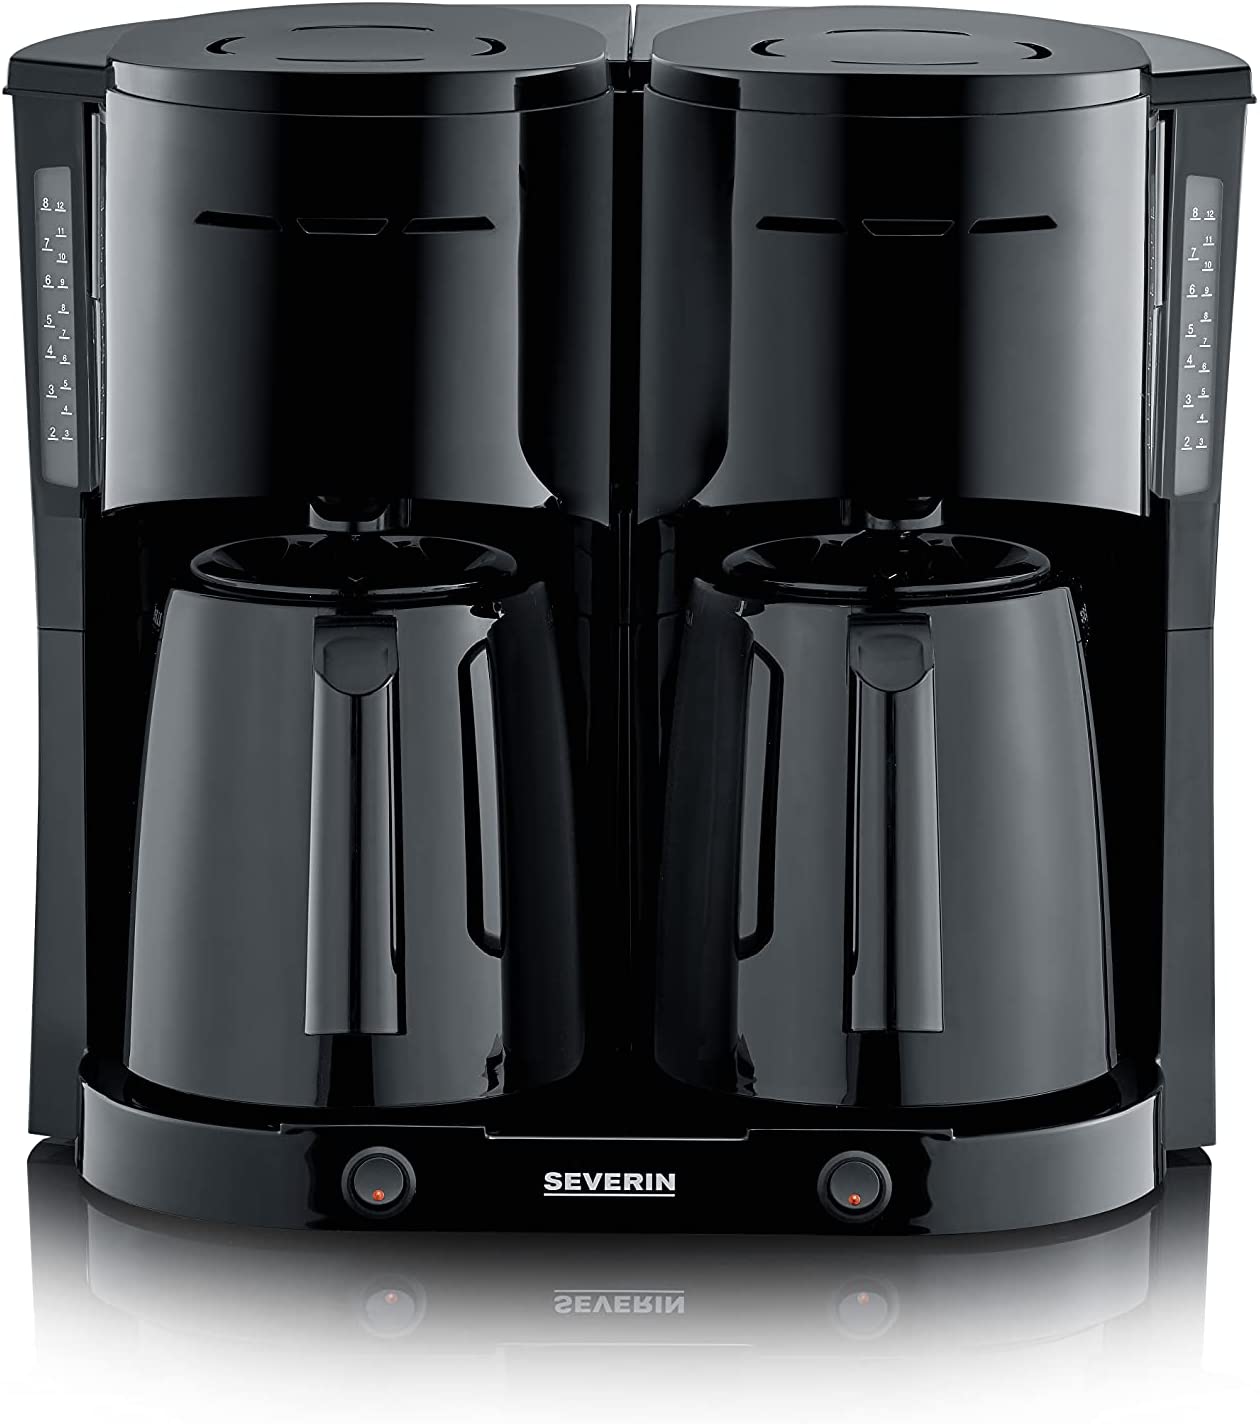 SEVERIN KA 5829 Duo Filter Coffee Machine with Thermal Jug, Coffee Machine for up to 16 Cups, Attractive Filter Machine with 2 Insulated Jugs, Brushed Black